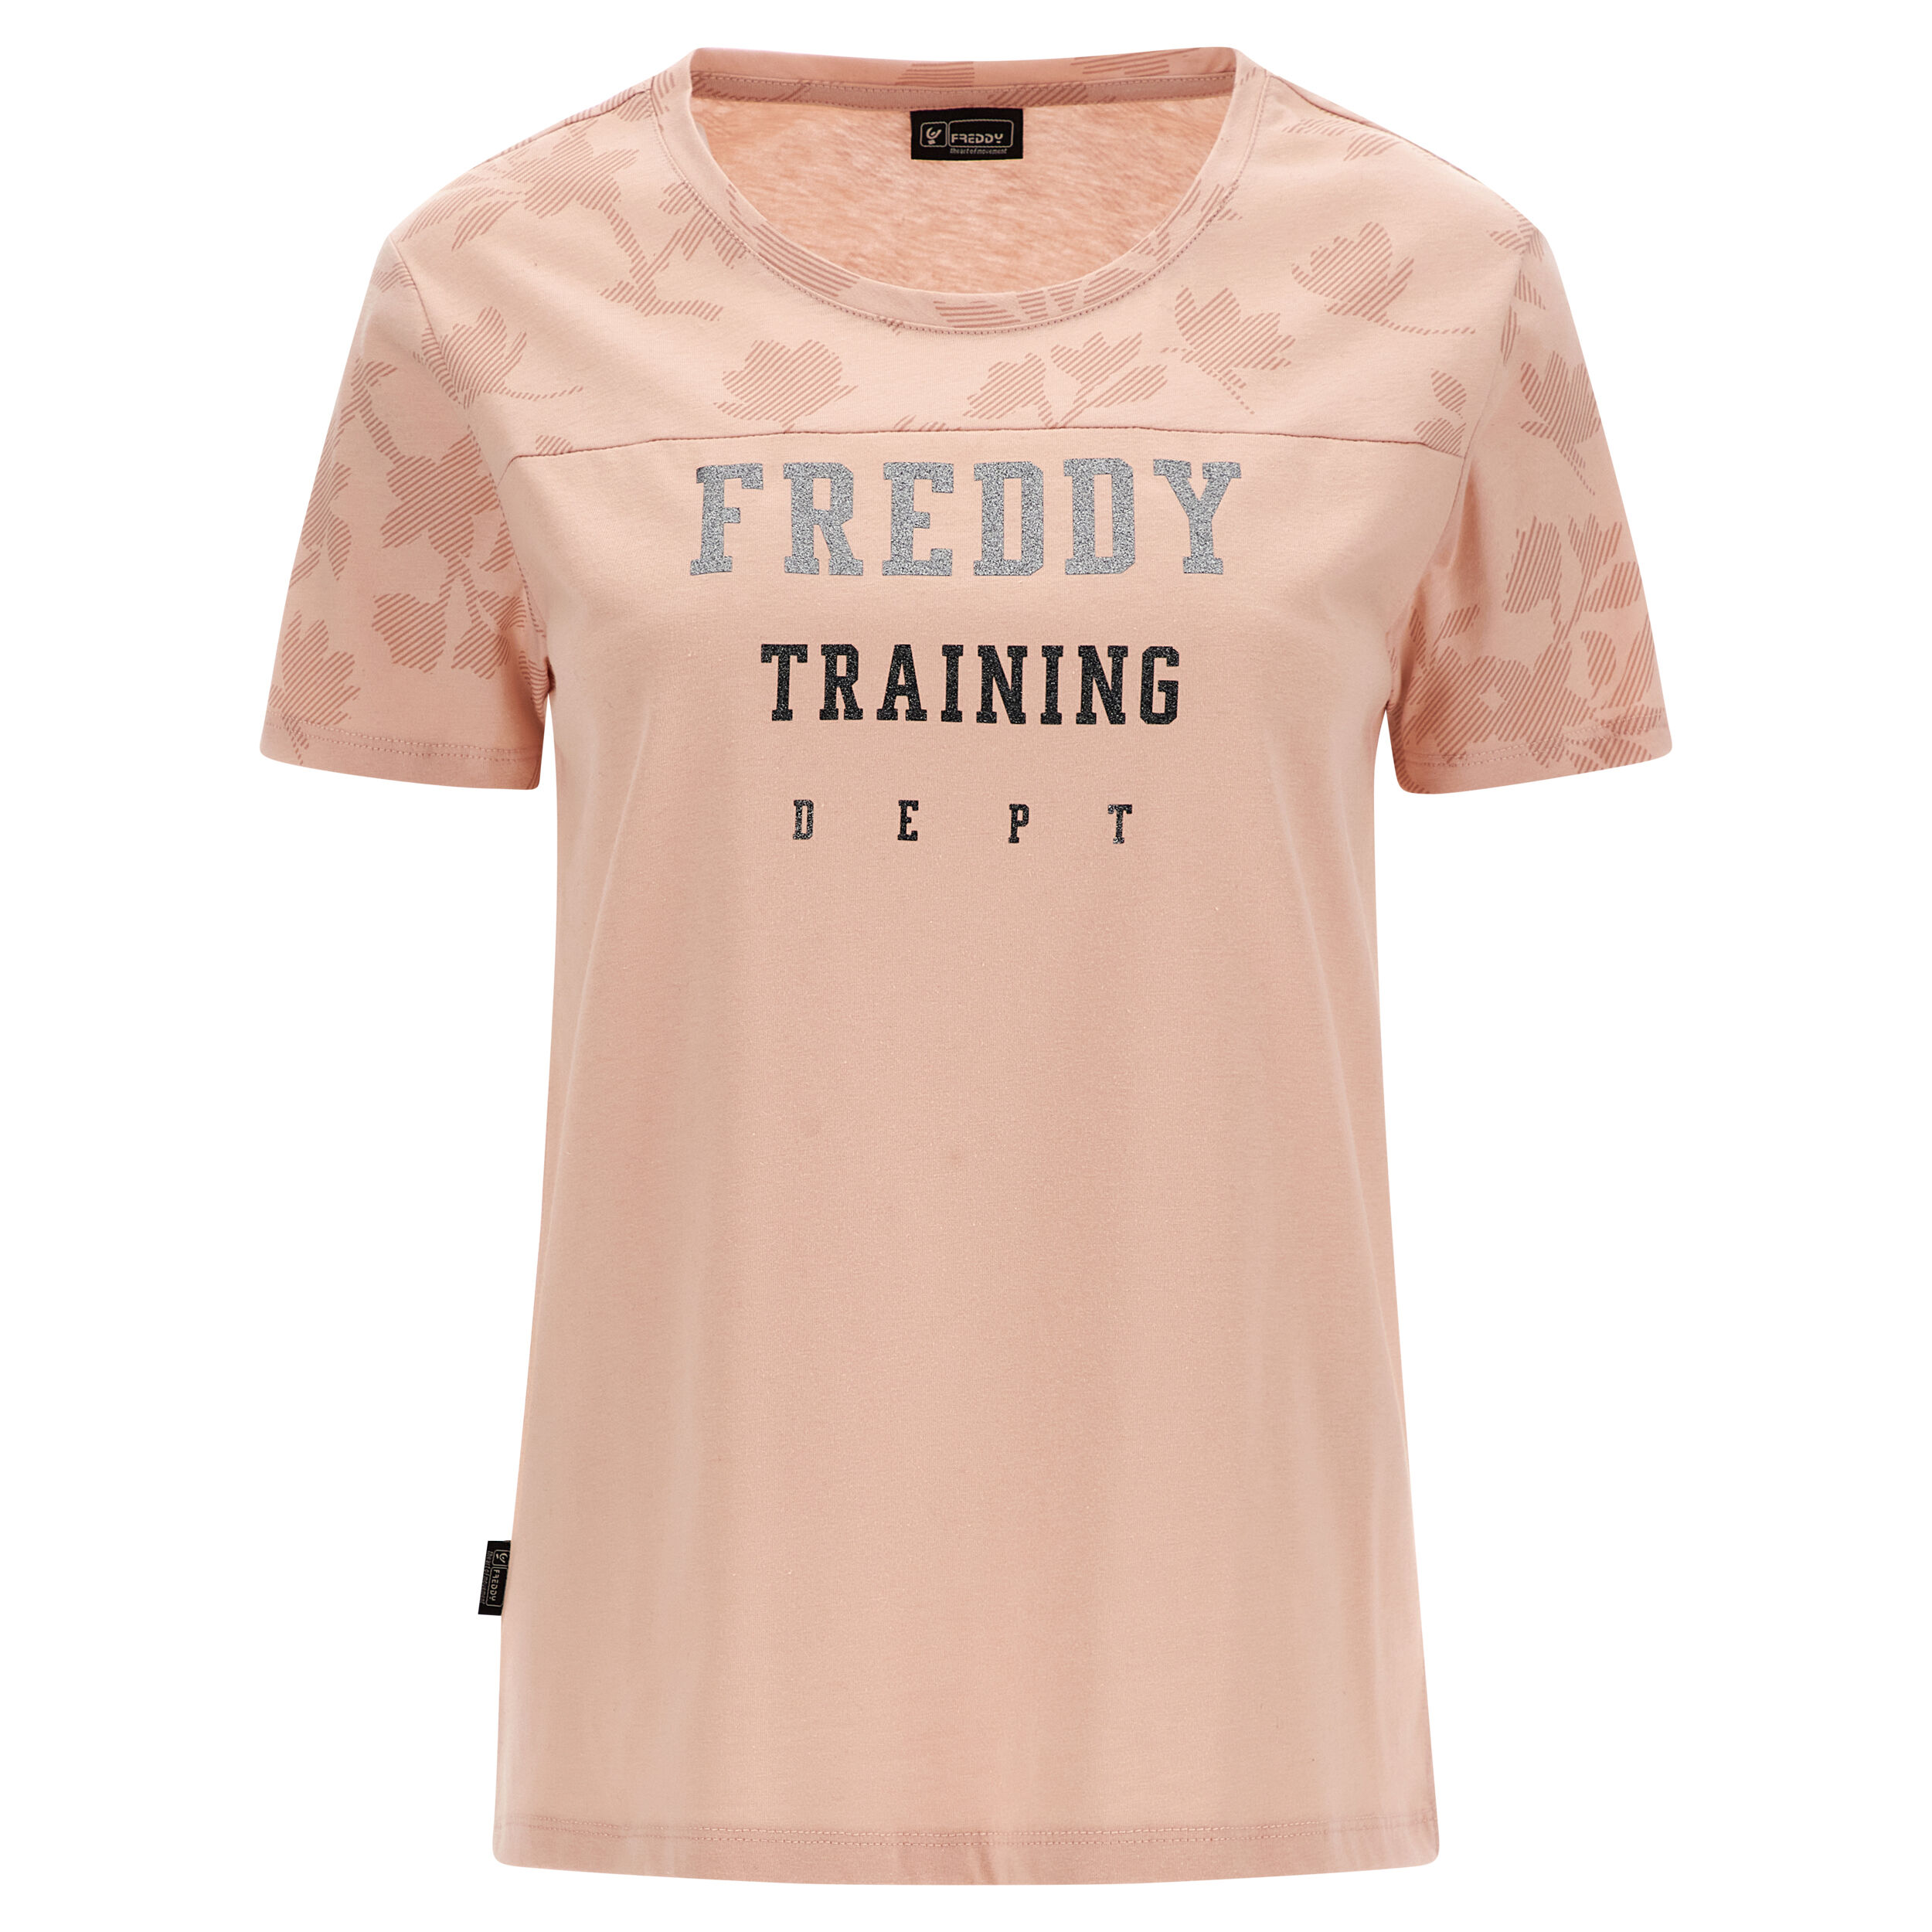 Freddy T-shirt comfort fit con maniche e spalle stampa floreale Pink-Allover Flower Pink Donna Large